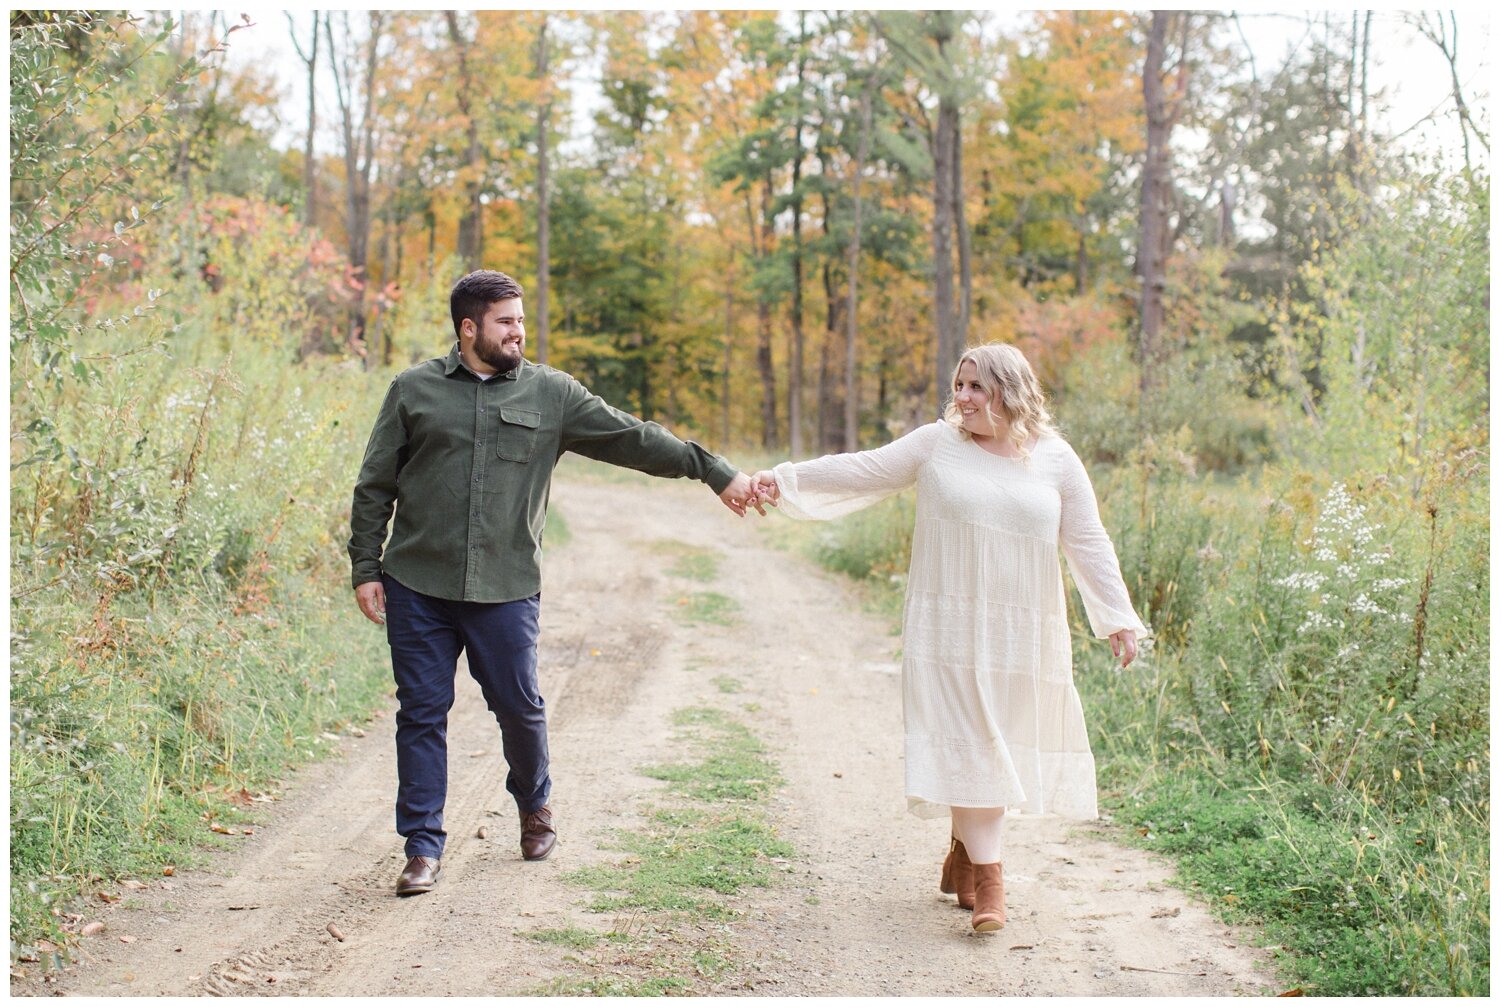 Clarks Summit PA Fall Engagement Session_0022.jpg